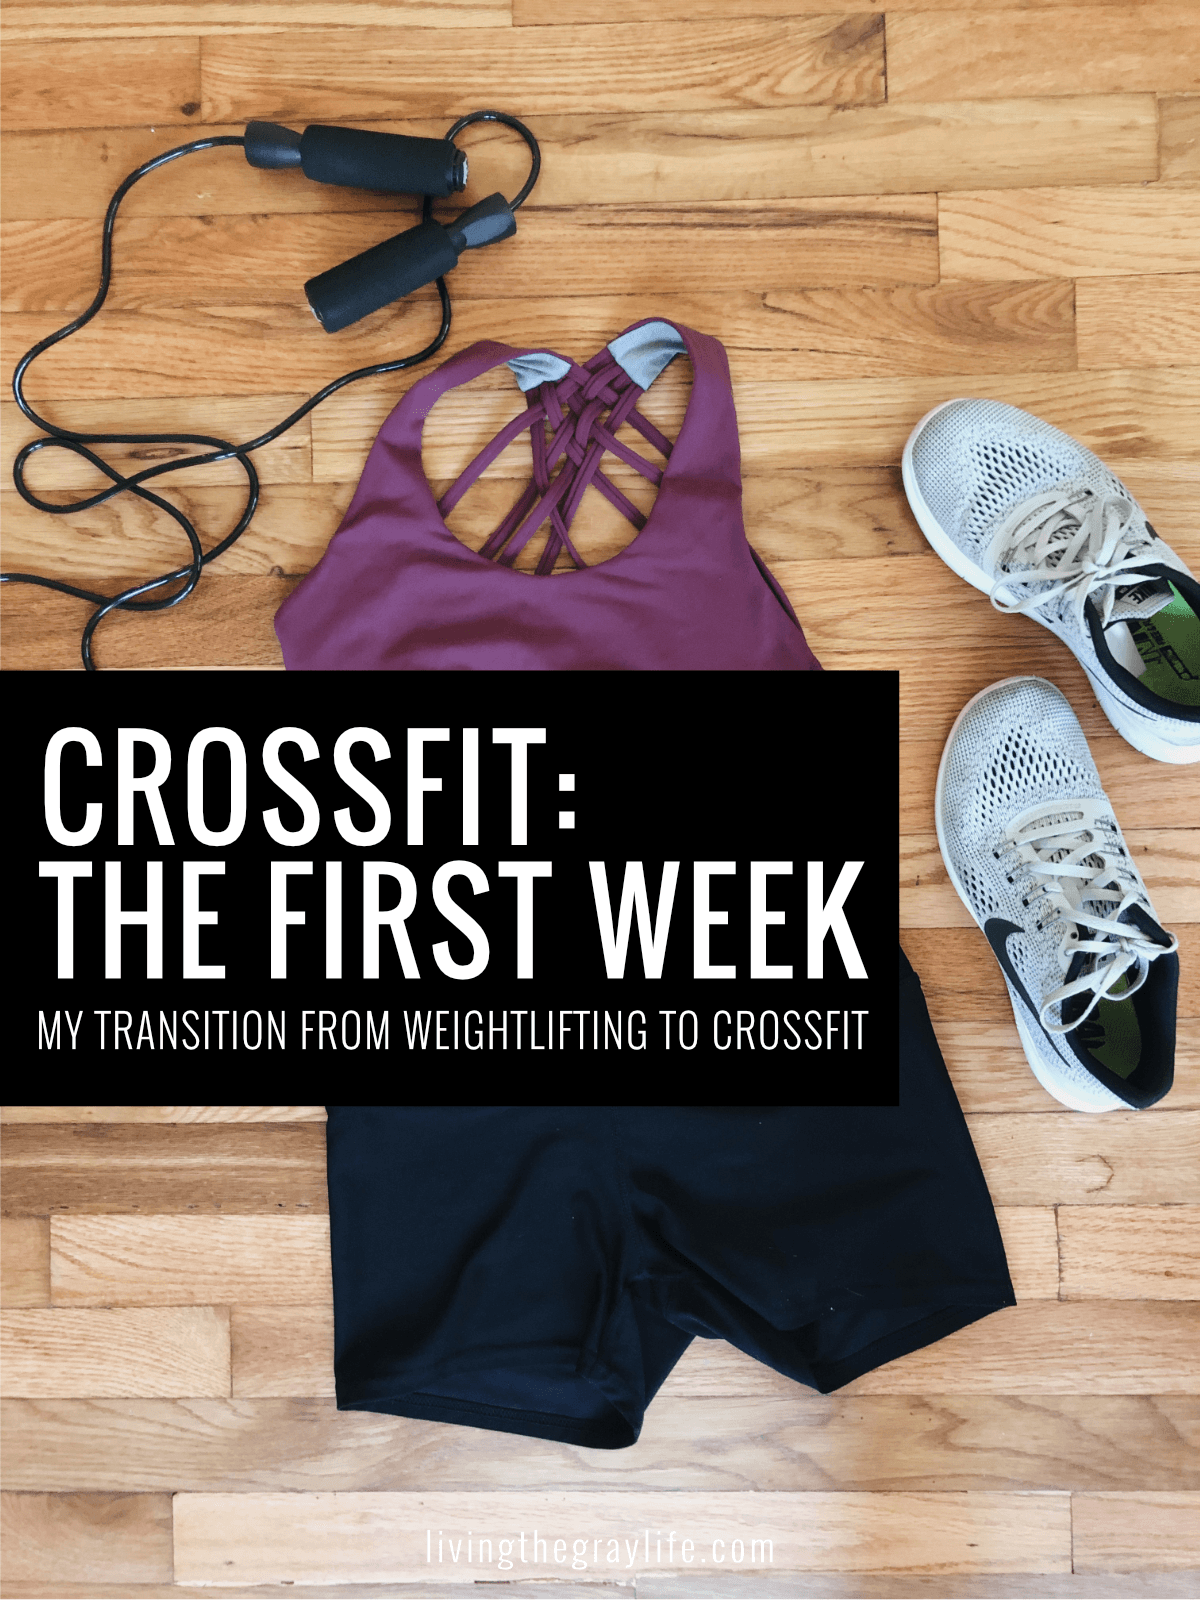 My CrossFit Experience: The First Week